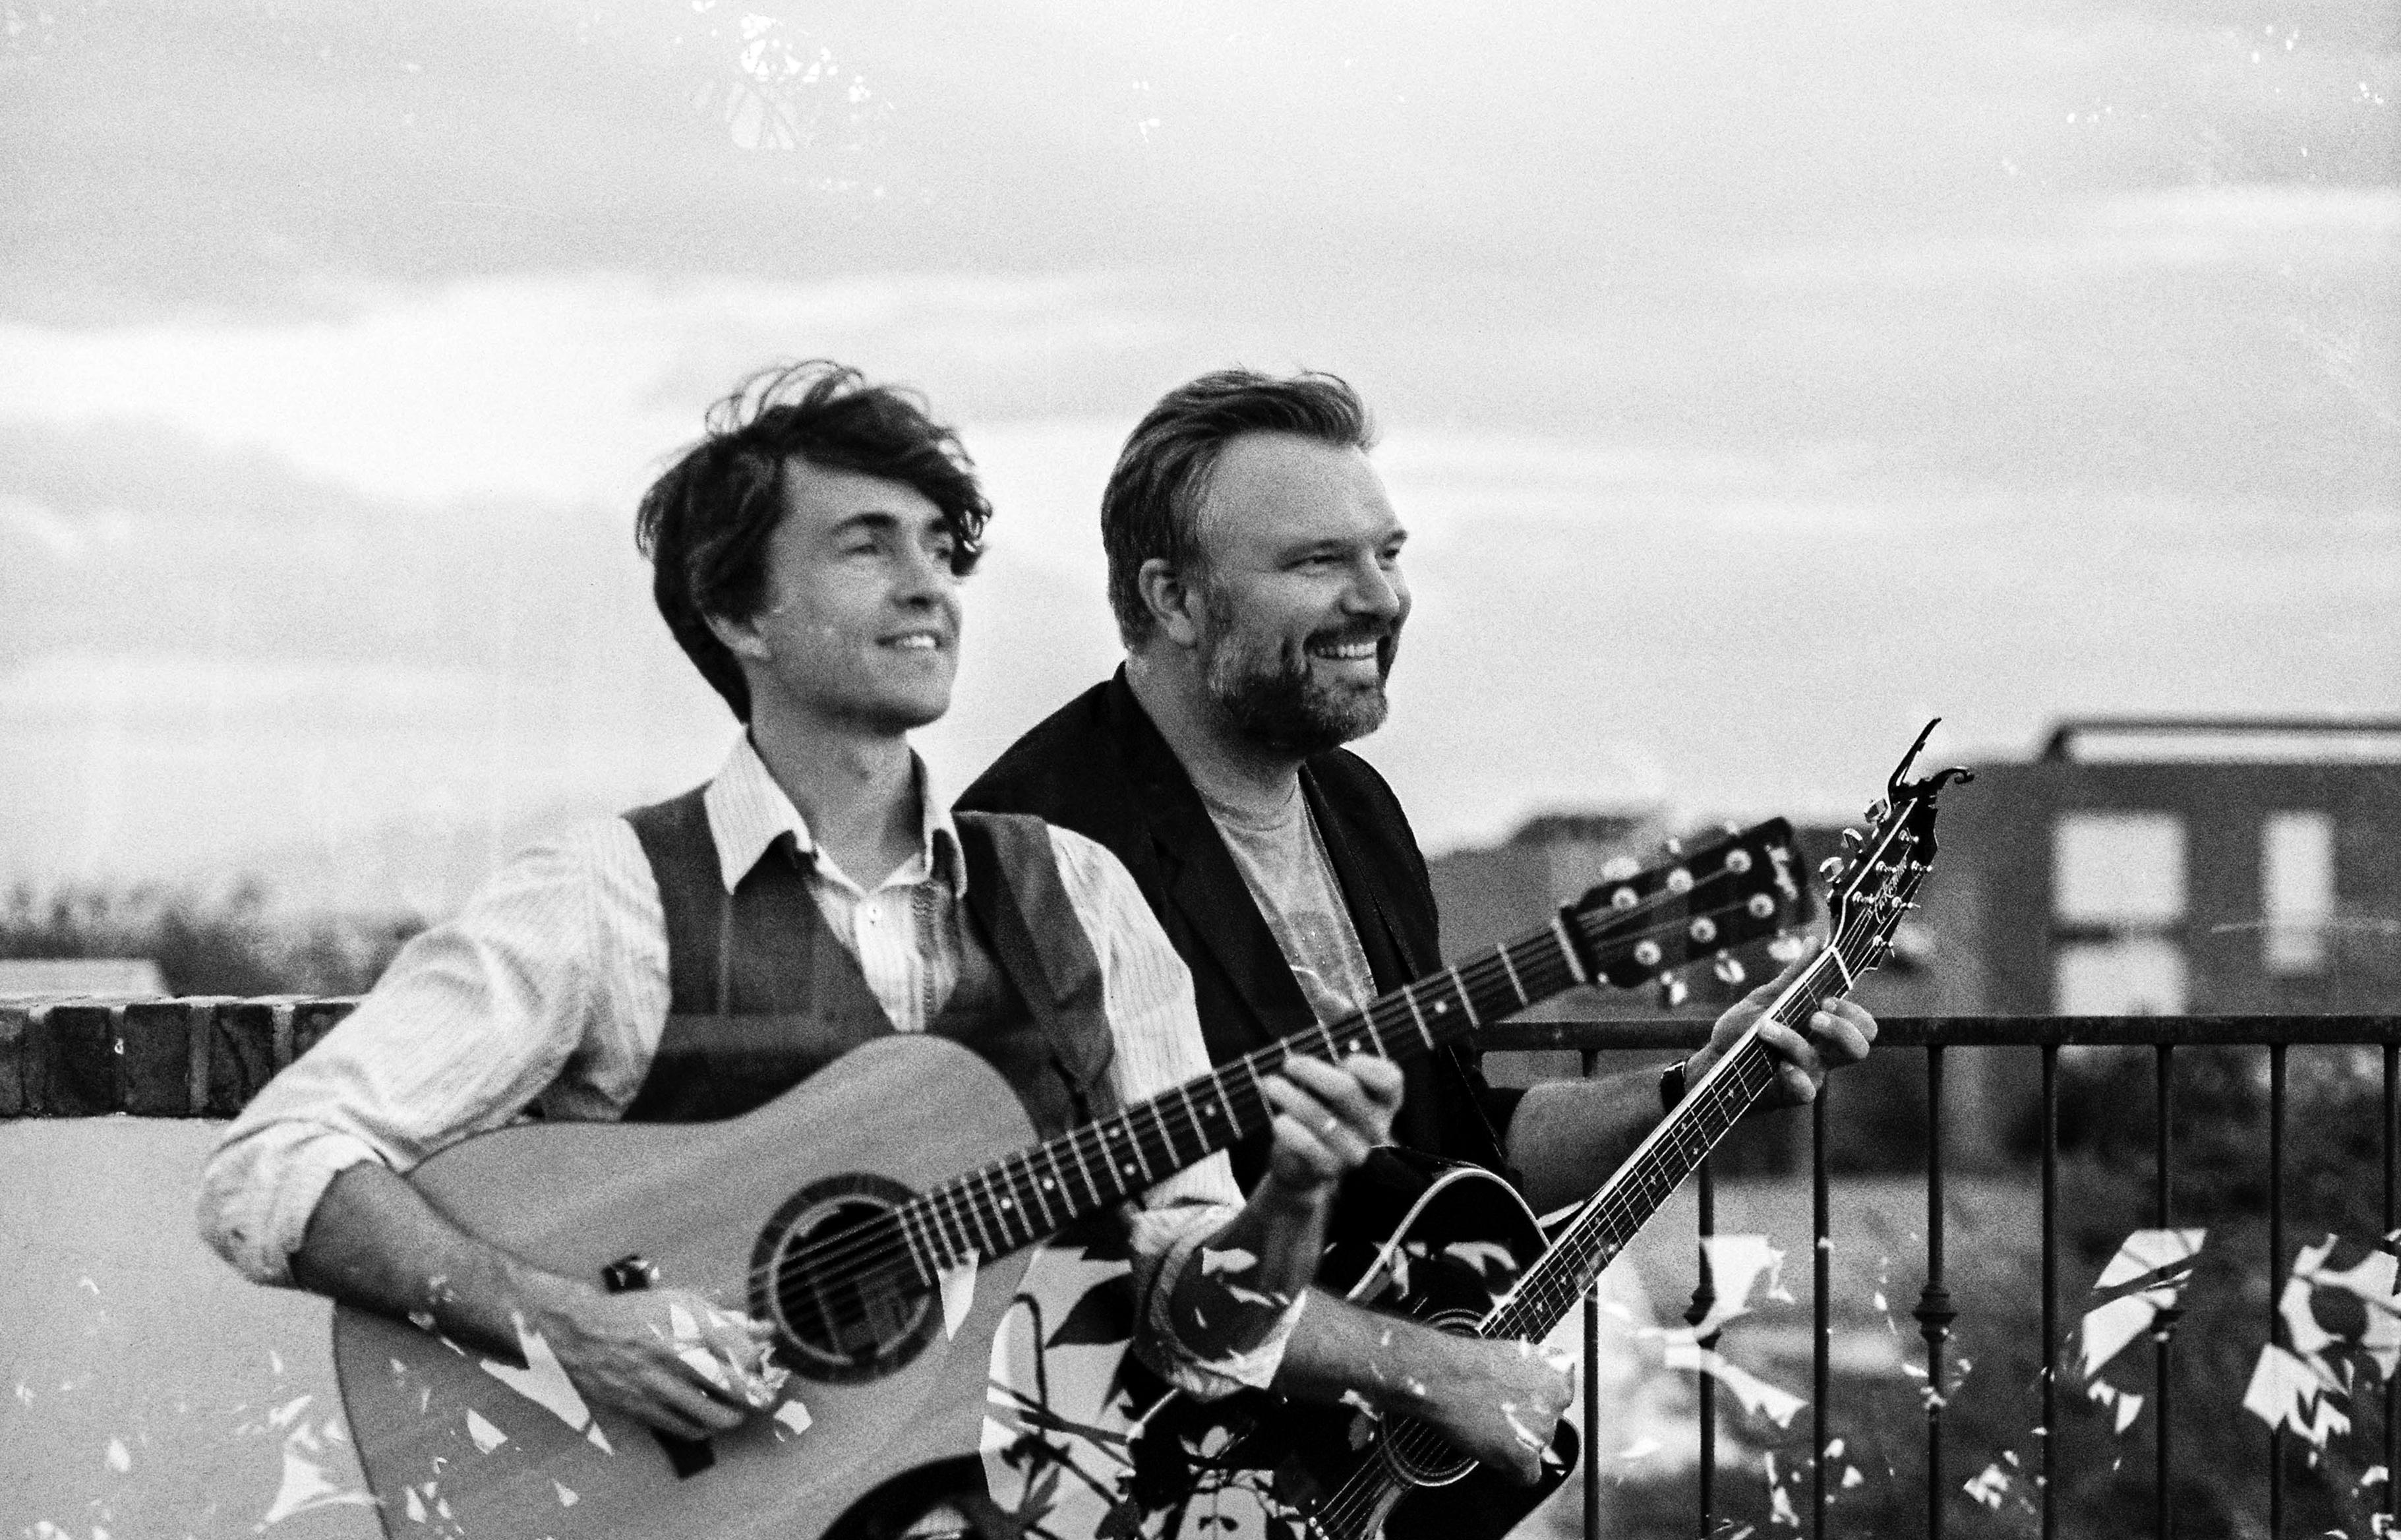 black and whit image of two men with guitars